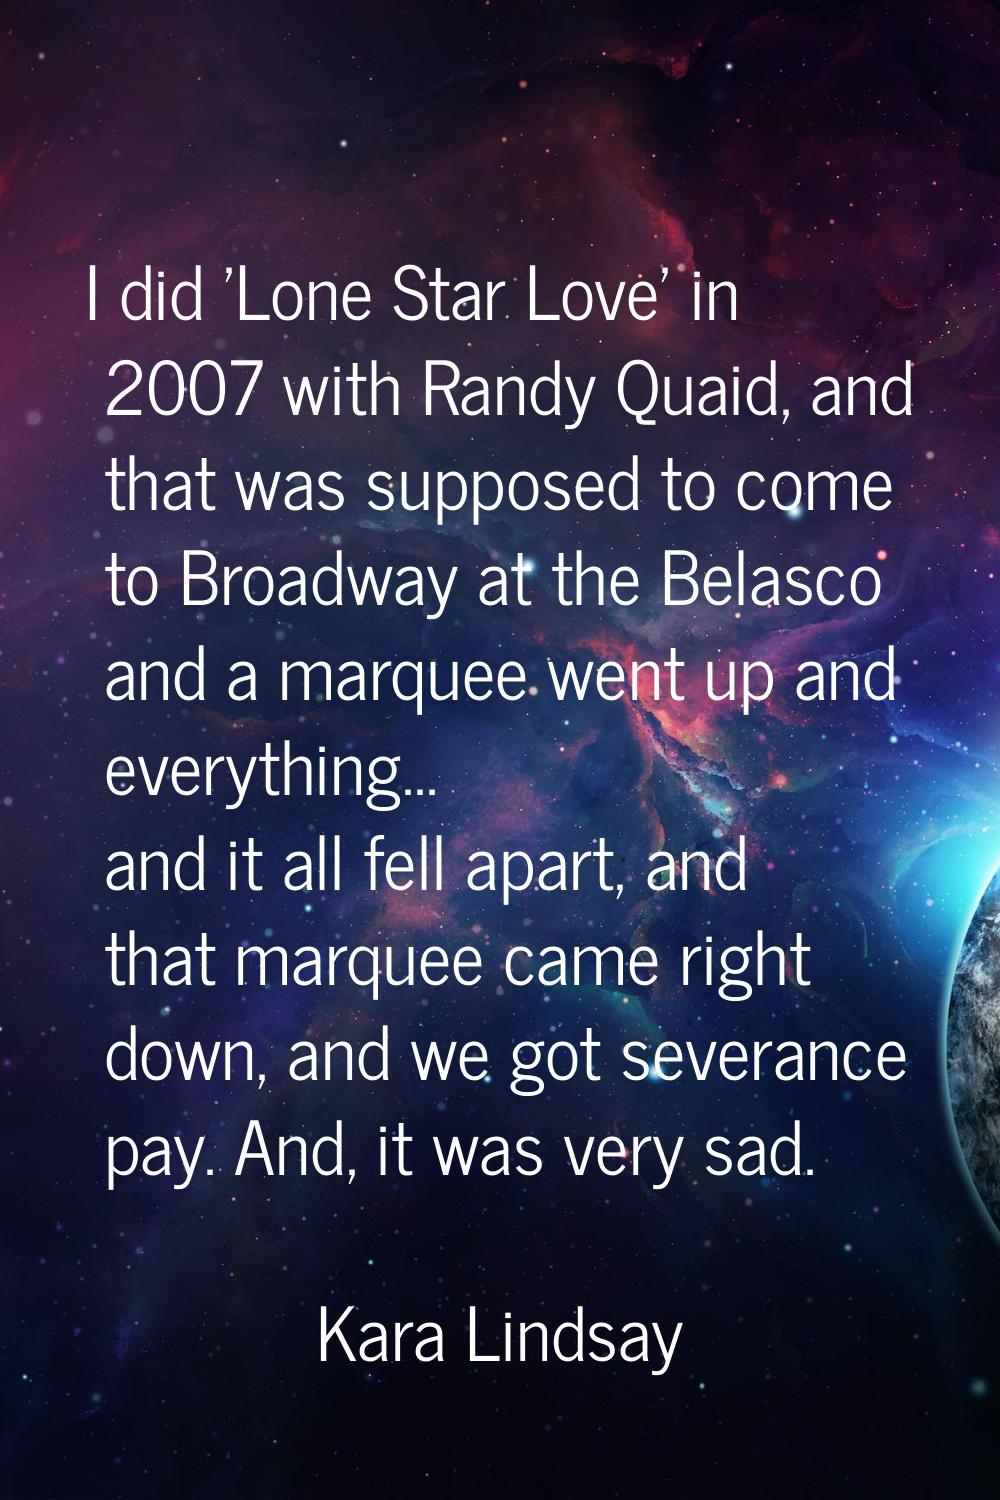 I did 'Lone Star Love' in 2007 with Randy Quaid, and that was supposed to come to Broadway at the B